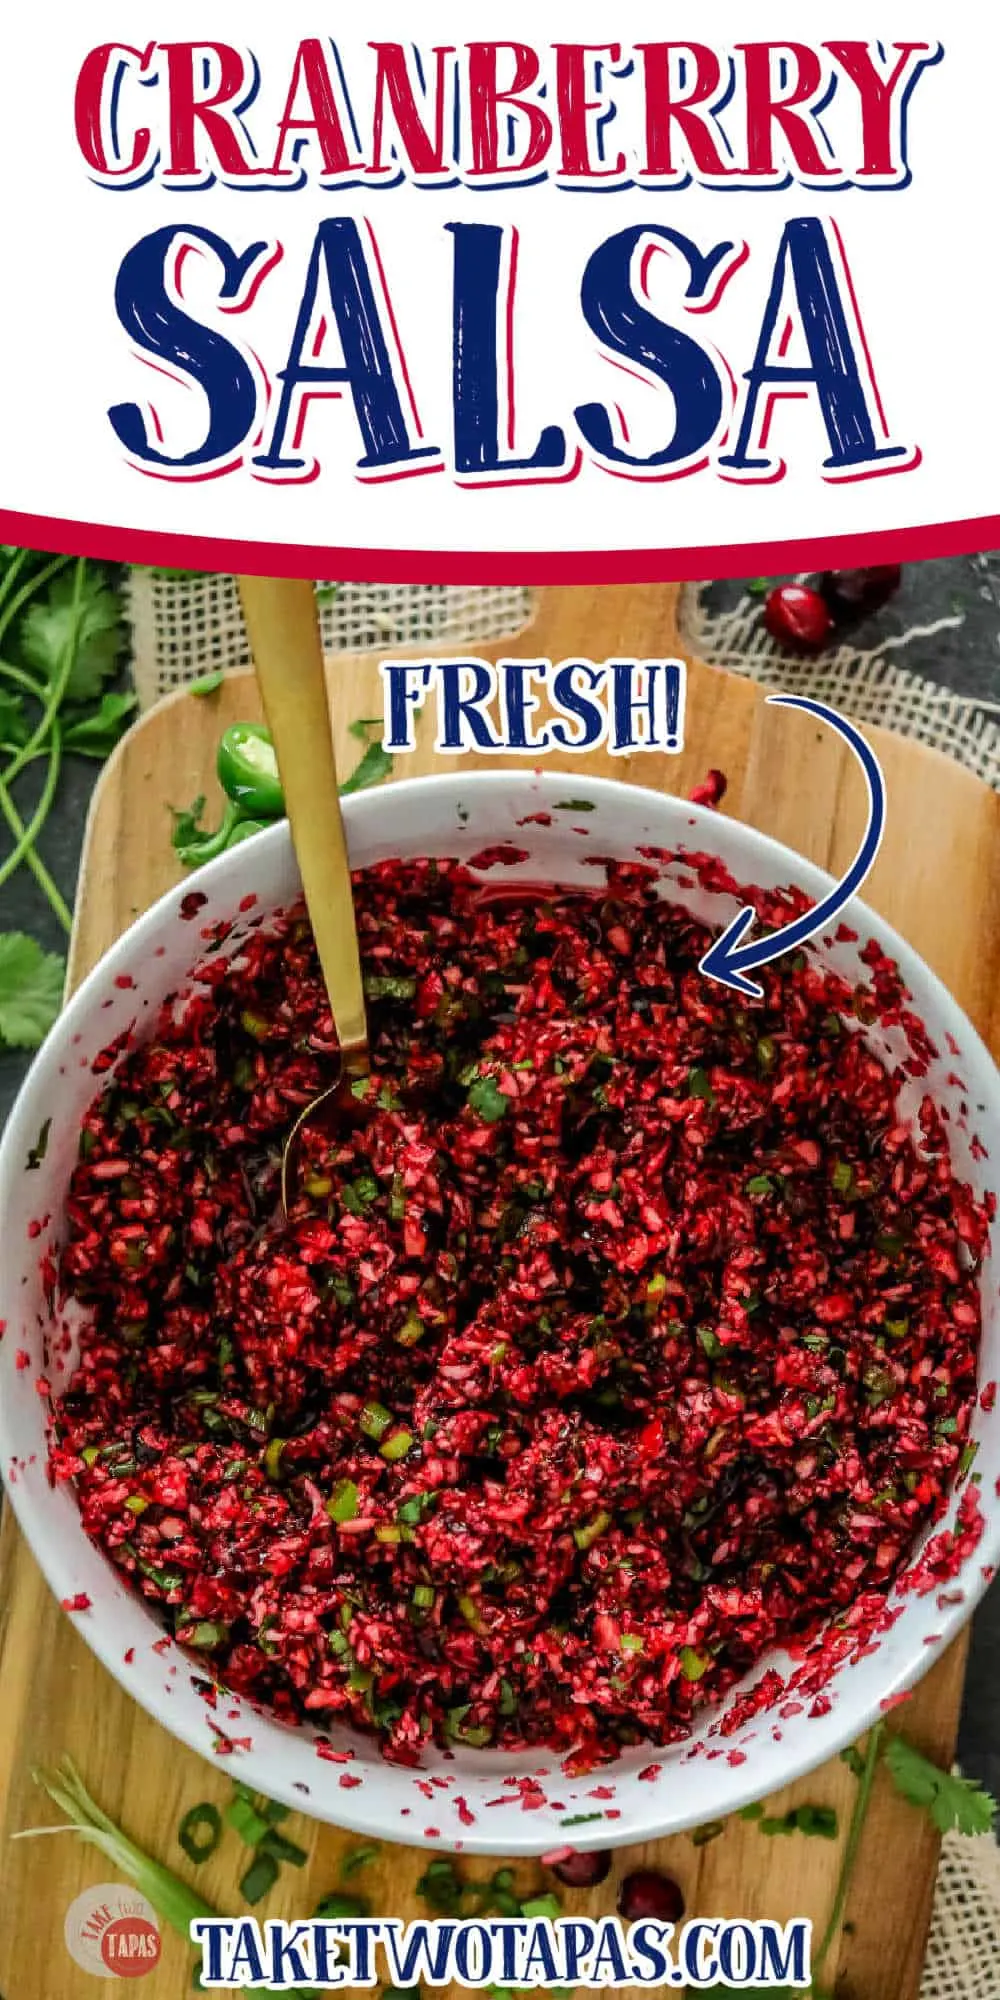 bowl of salsa with text "fresh cranberry salsa"